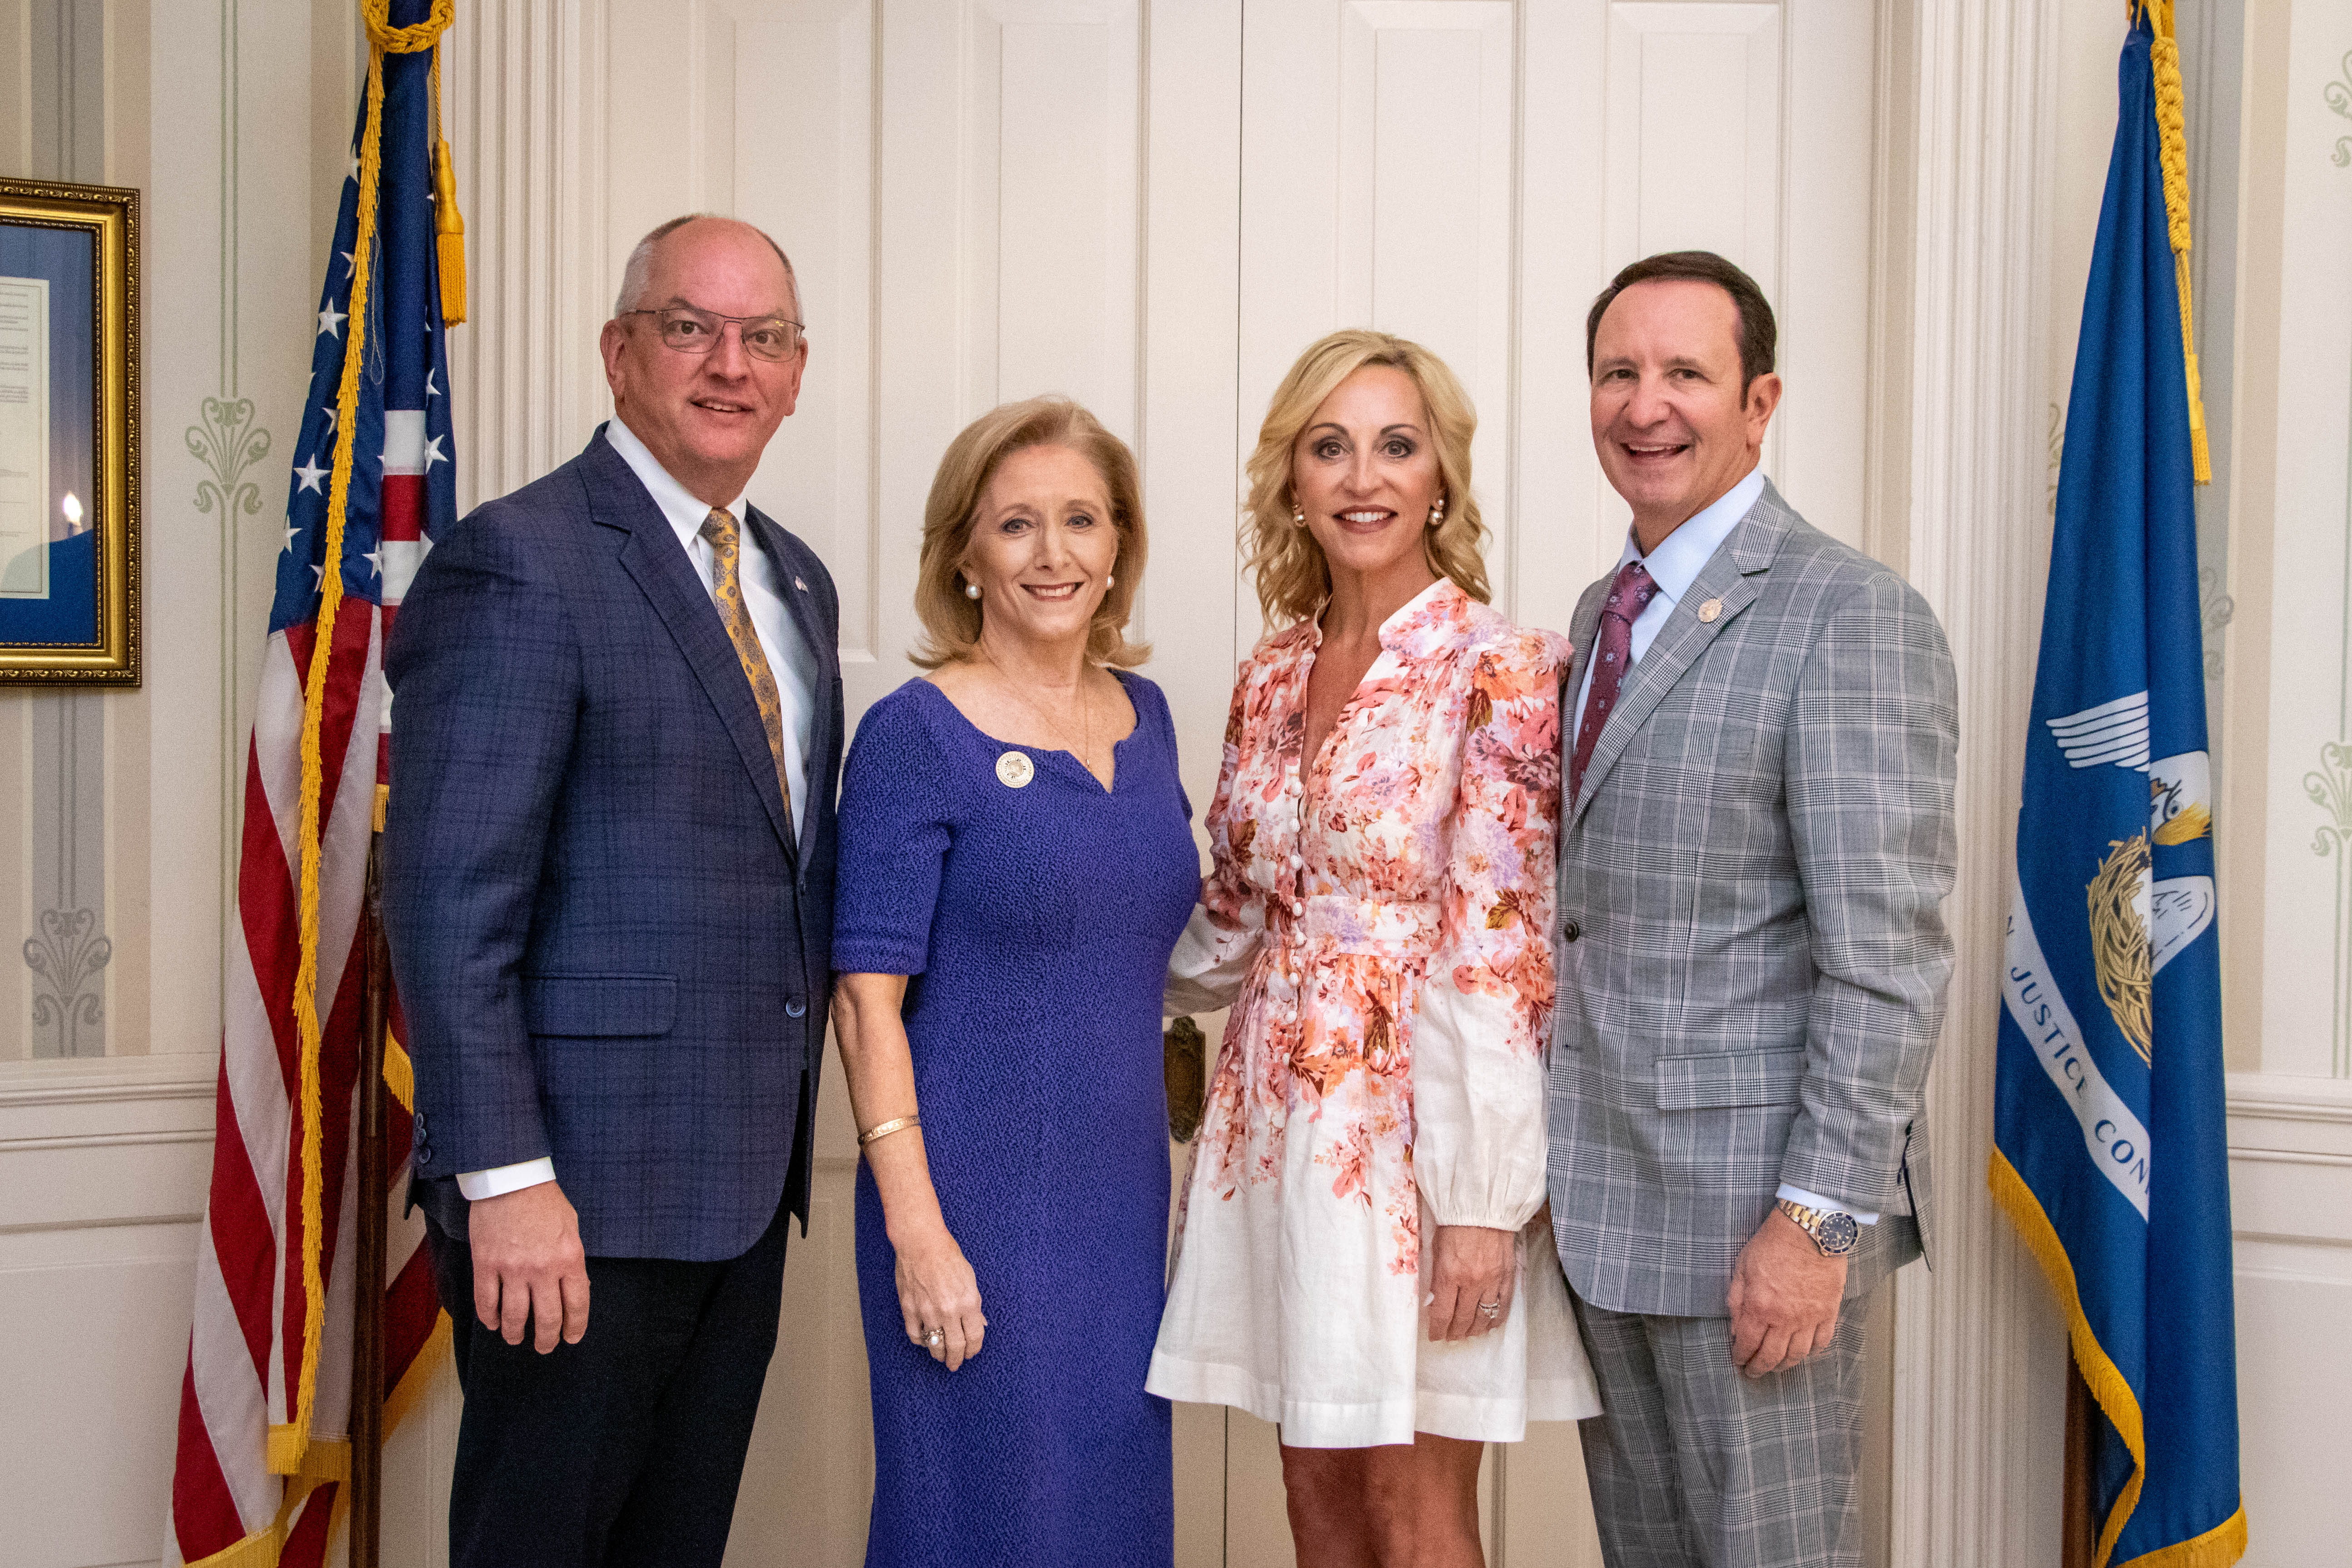 Governor and First Lady Edwards Meet with Governor-Elect and Mrs. Landry at  Louisiana Governor's Mansion